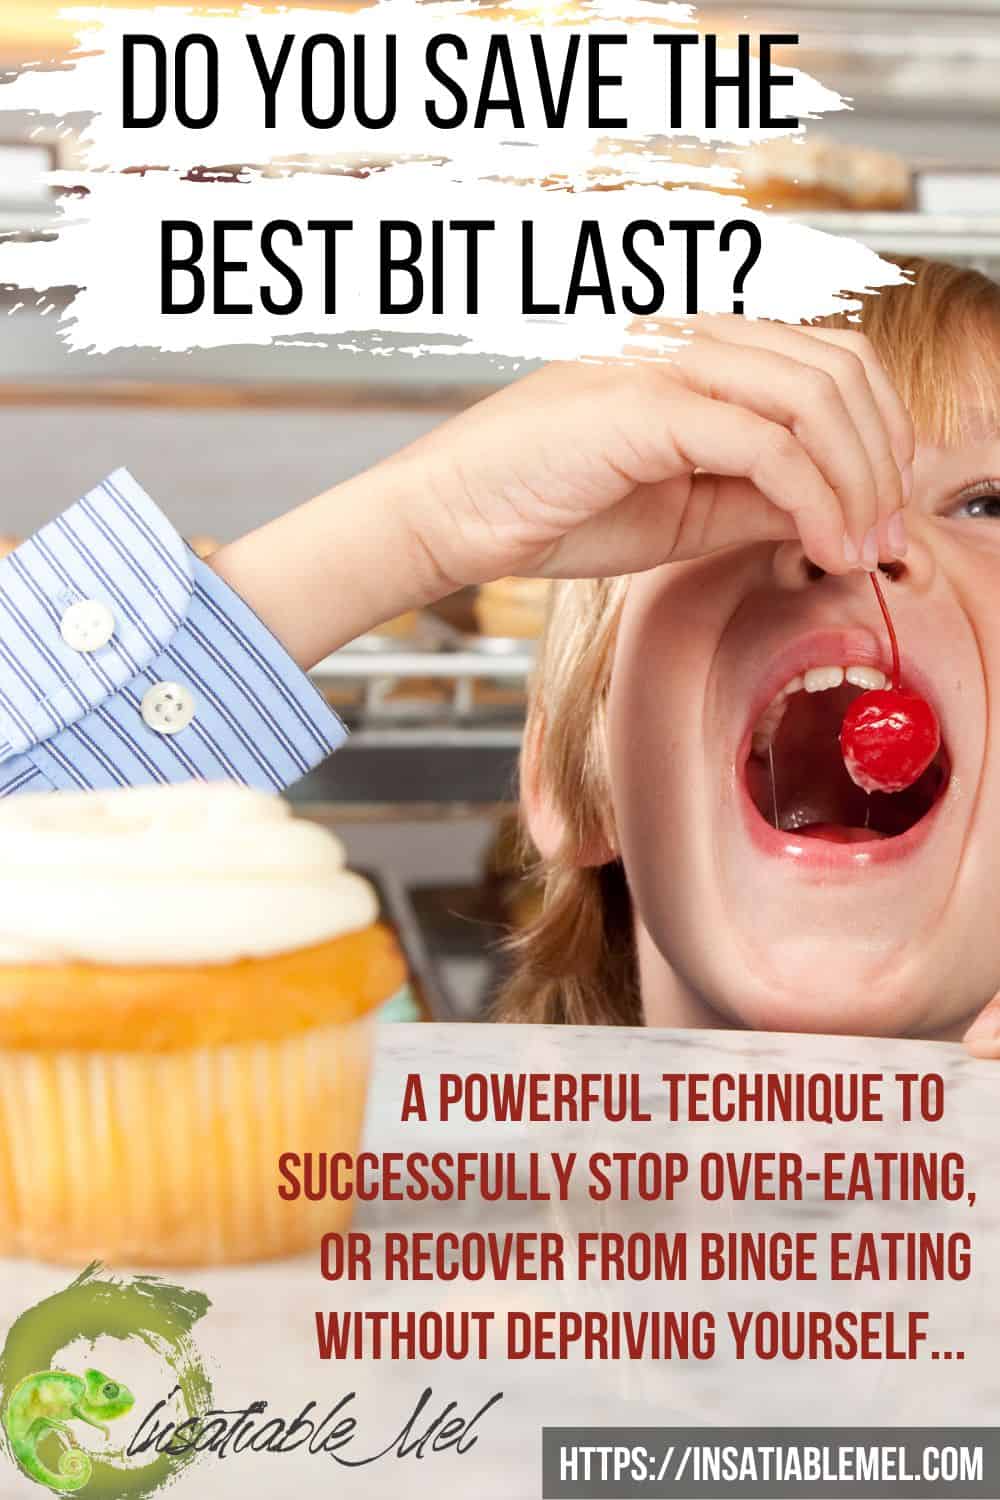 Do you save the best bit last #insatiablemel #bingeeating #rapidtransformationaltherapy #hypnotherapy